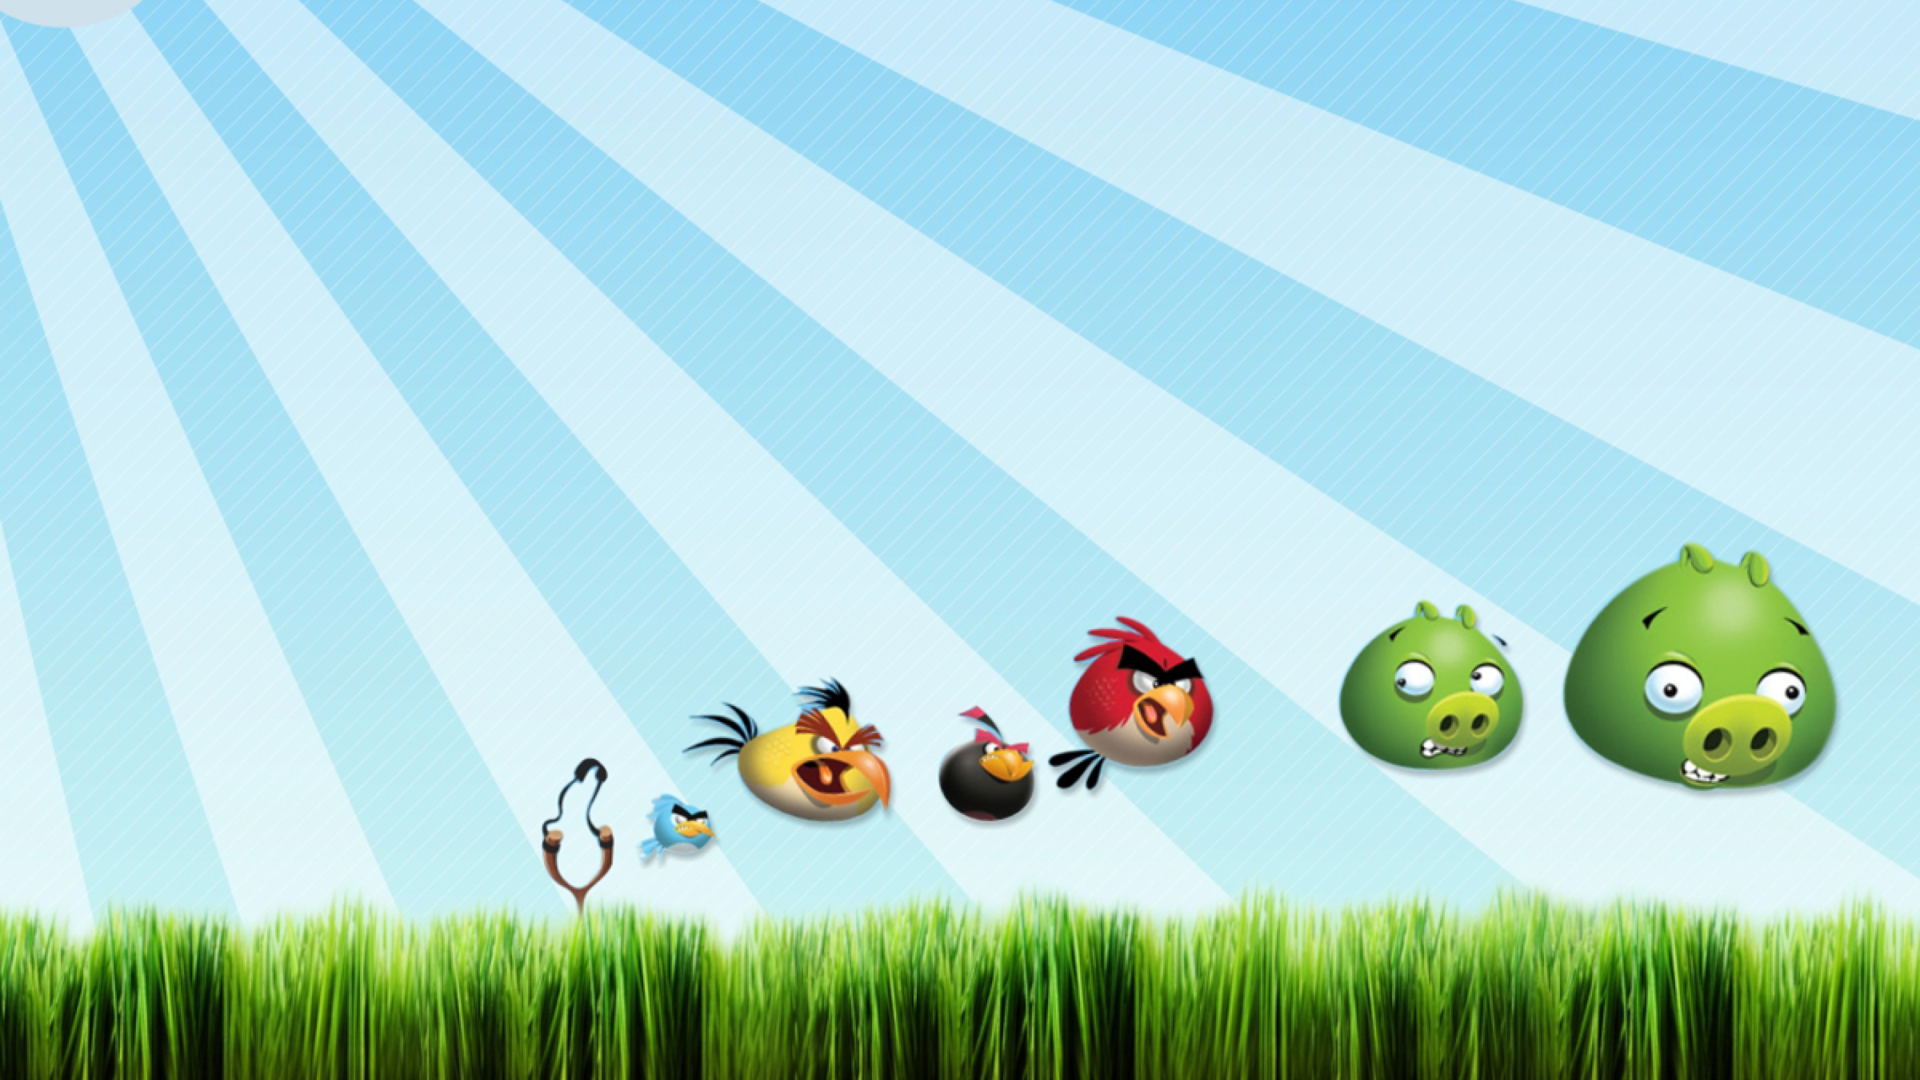 Angry Birds Bad Pigs wallpaper 1920x1080